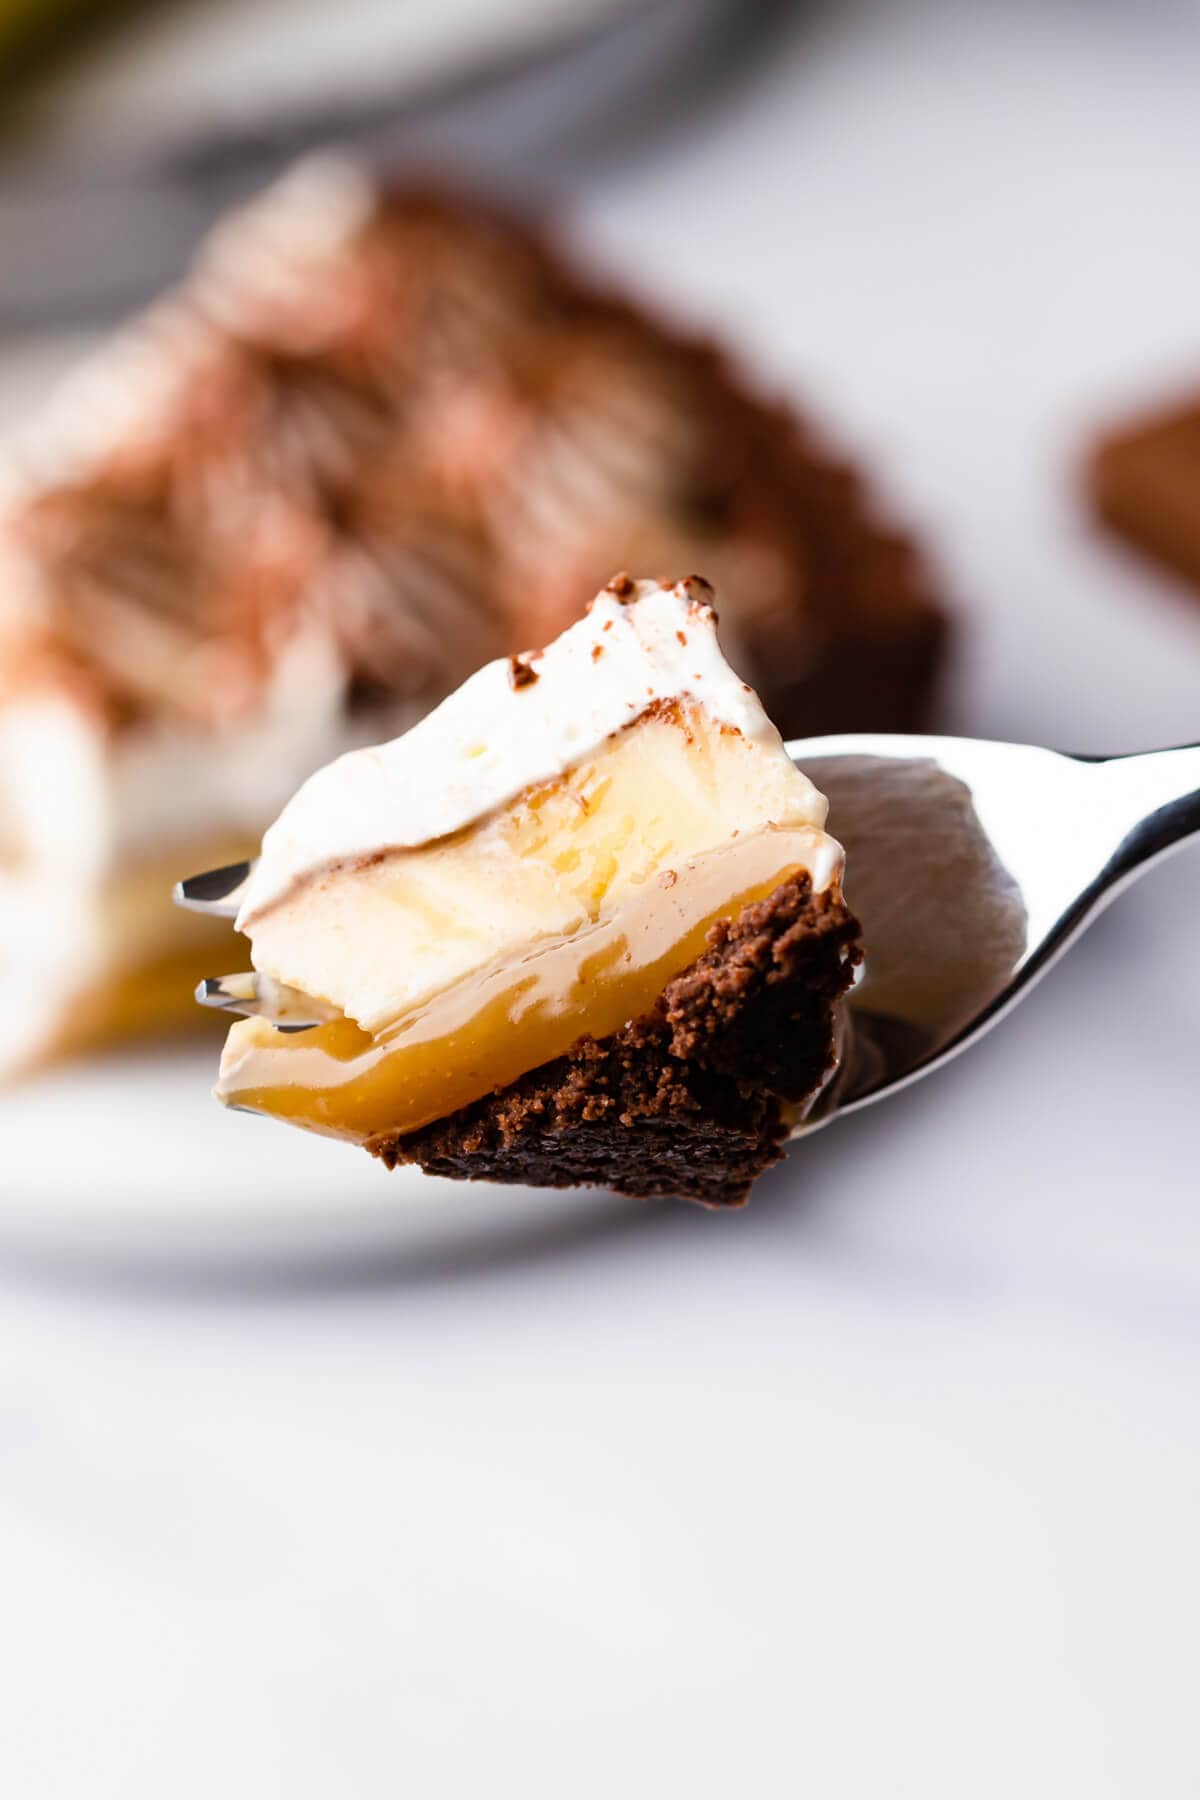 Overhead shot of a chocolate coconut banoffee pie with a slice being cut out